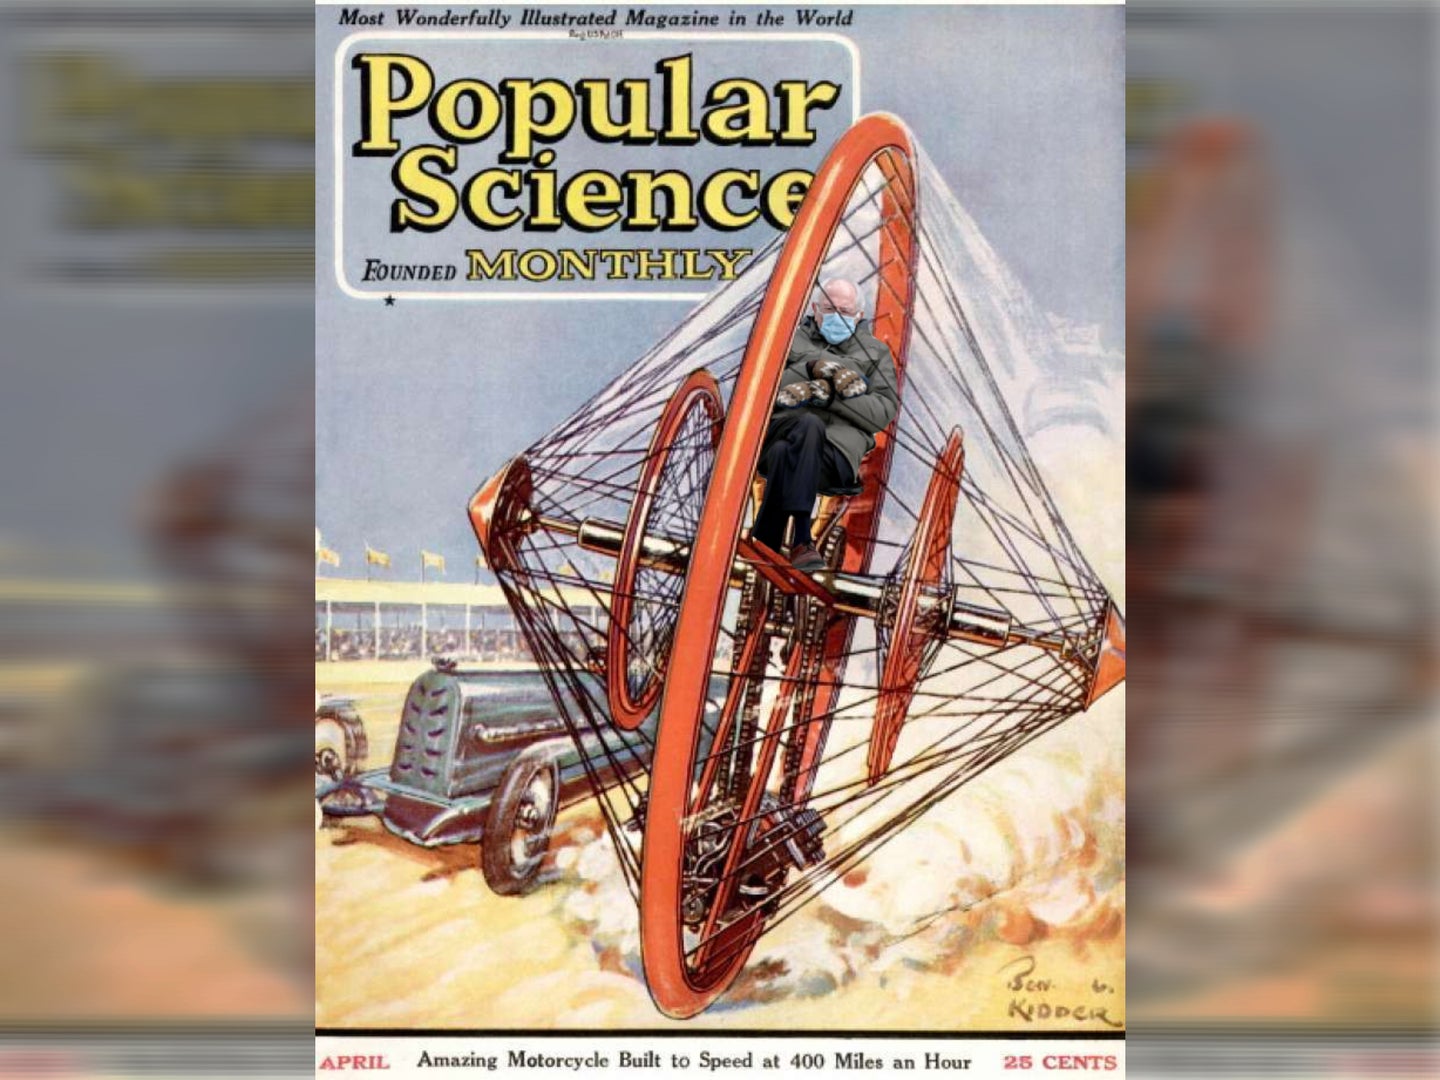 US Senator Bernie Sanders edited into a vintage Popular Science magazine cover to look like he's driving an experimental single-wheel motorcycle.